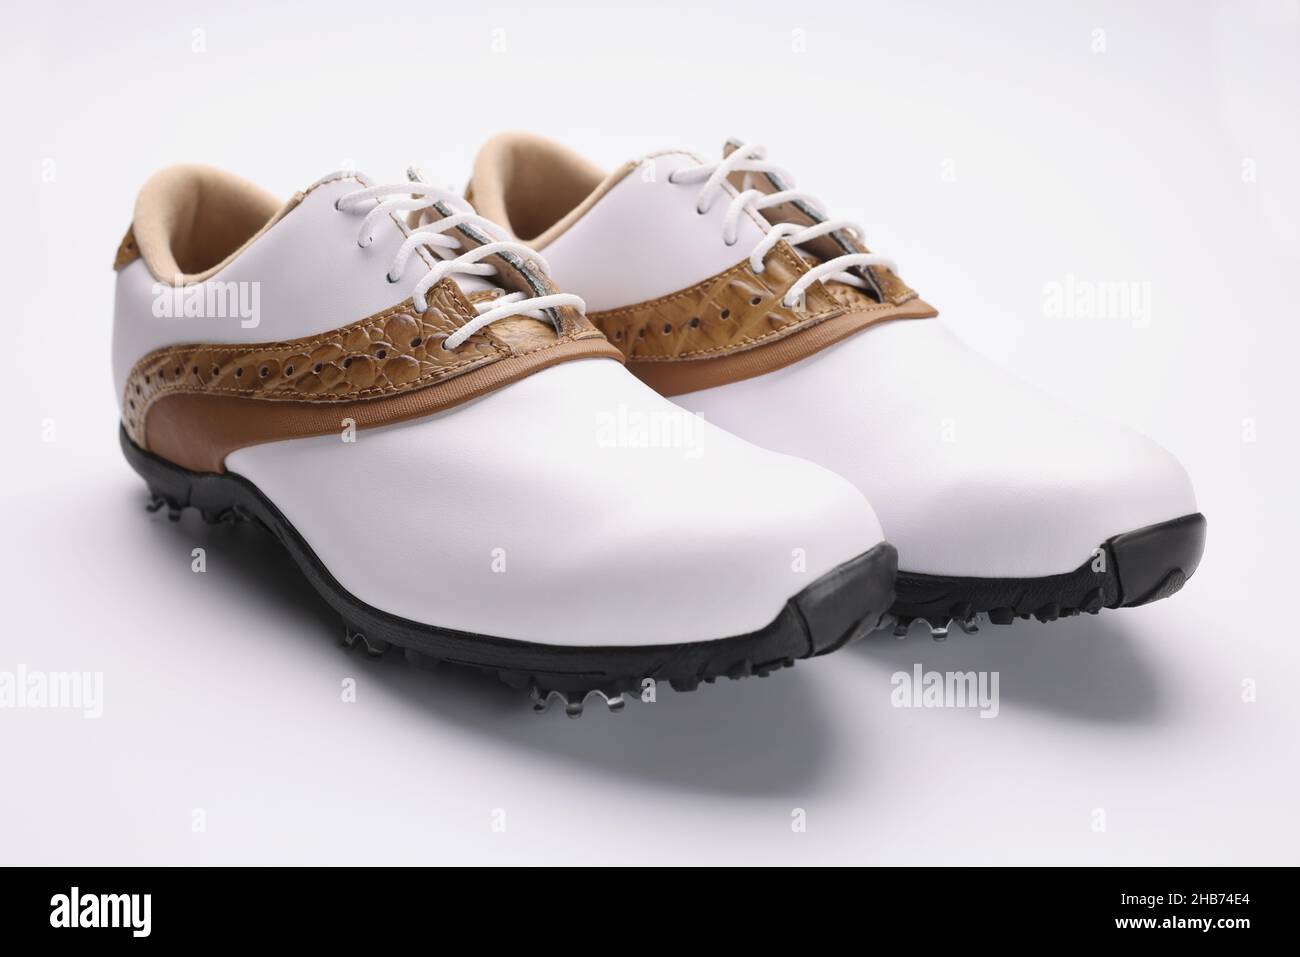 Pair of stylish fashionable shoes with unique design, white leather combines with gold Stock Photo